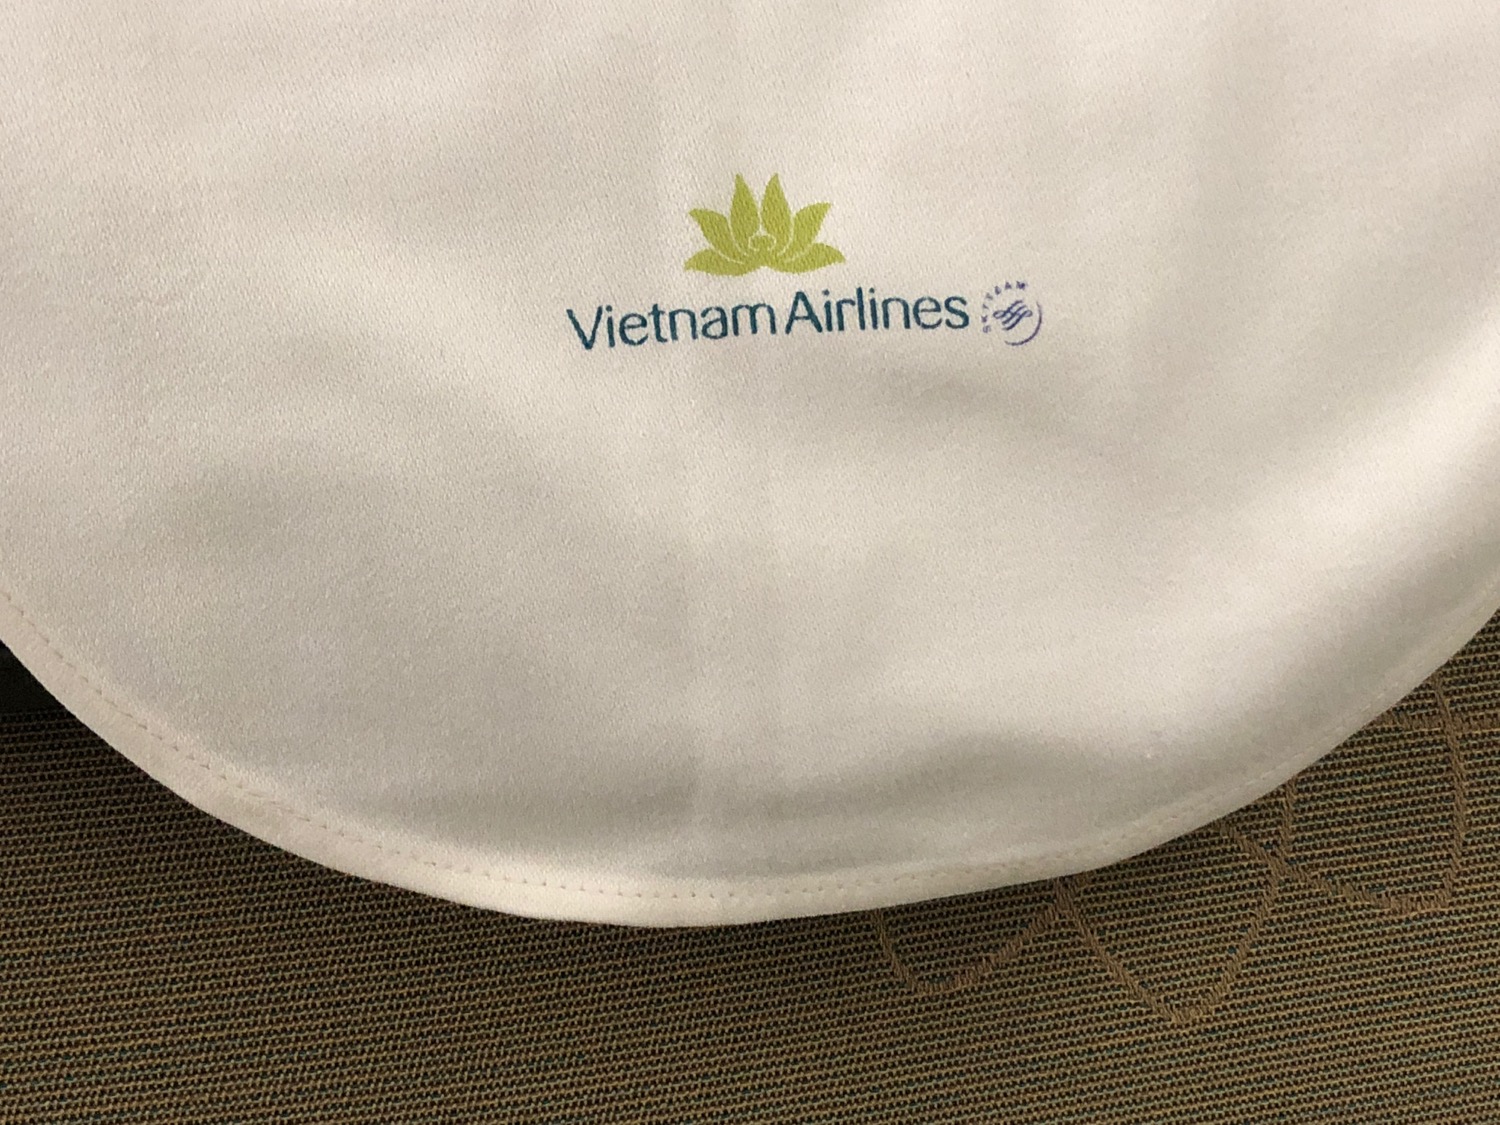 a white cloth with a logo on it